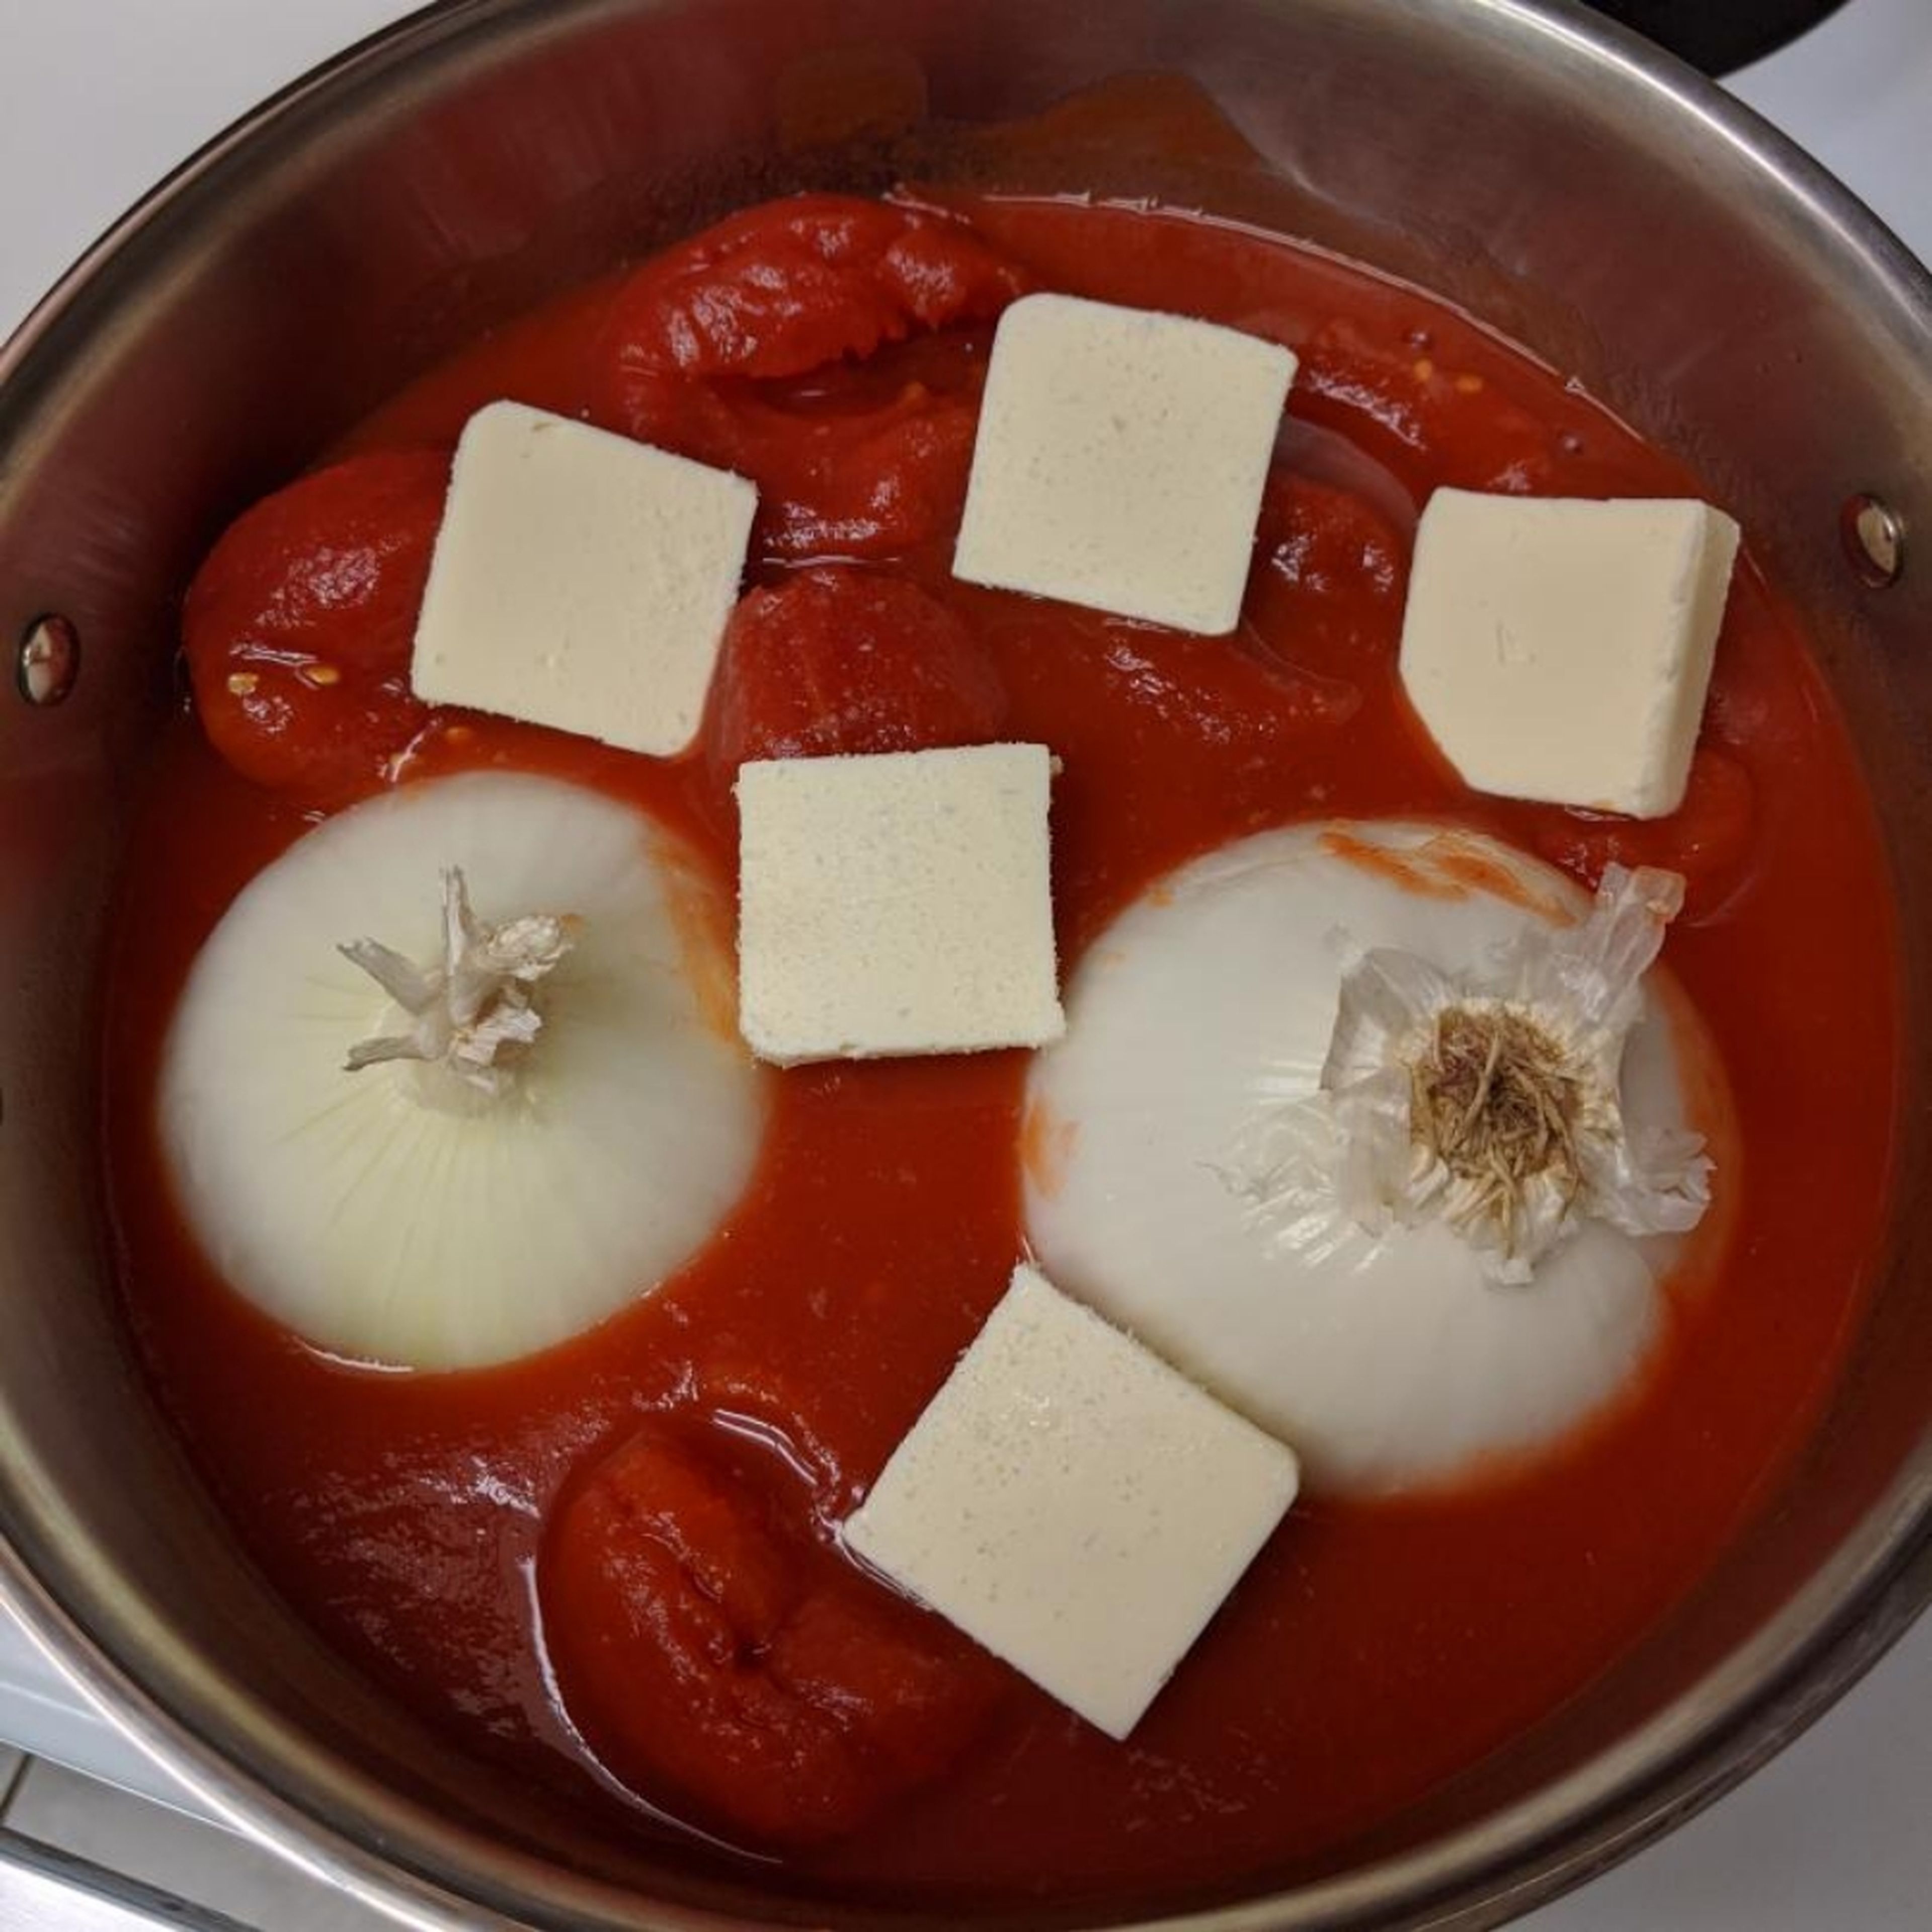 Empty tomatoes into sauce pan, cut onion in half and place cut side down into pan, slice up the butter and place it around the sauce, sprinkle a pinch of salt over everything. Bring to a simmer over medium-high heat.